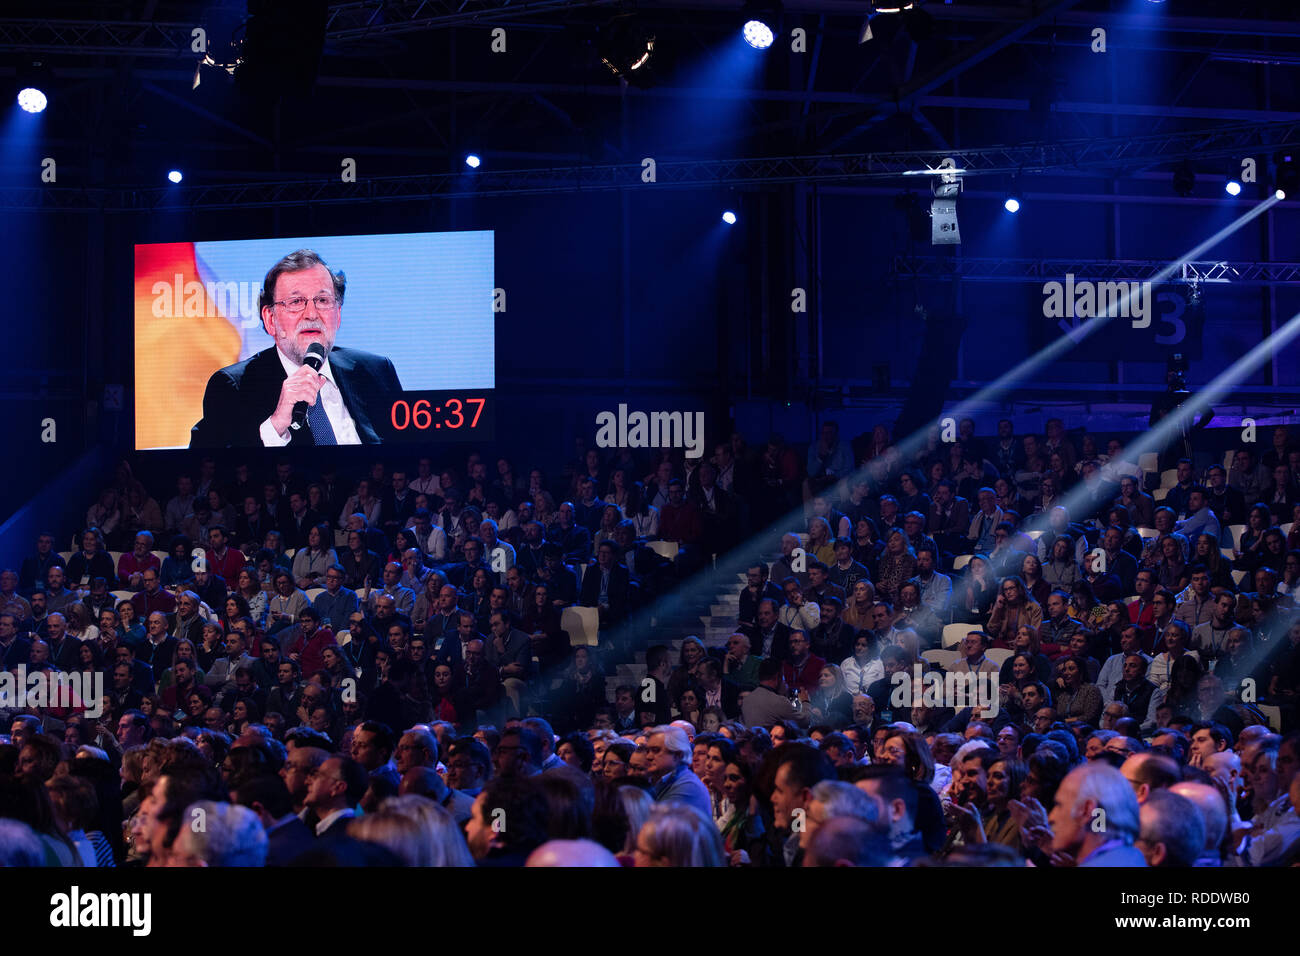 January 18, 2019 - Madrid, Spain - Mariano Rajoy speaking in the event. The PP celebrates its national convention to establish the main lines of its electoral program for the three elections scheduled for May 26 and are key to gauge the leadership of the popular president, Pablo Casado. (Credit Image: © Jesus Hellin/ZUMA Wire) Stock Photo